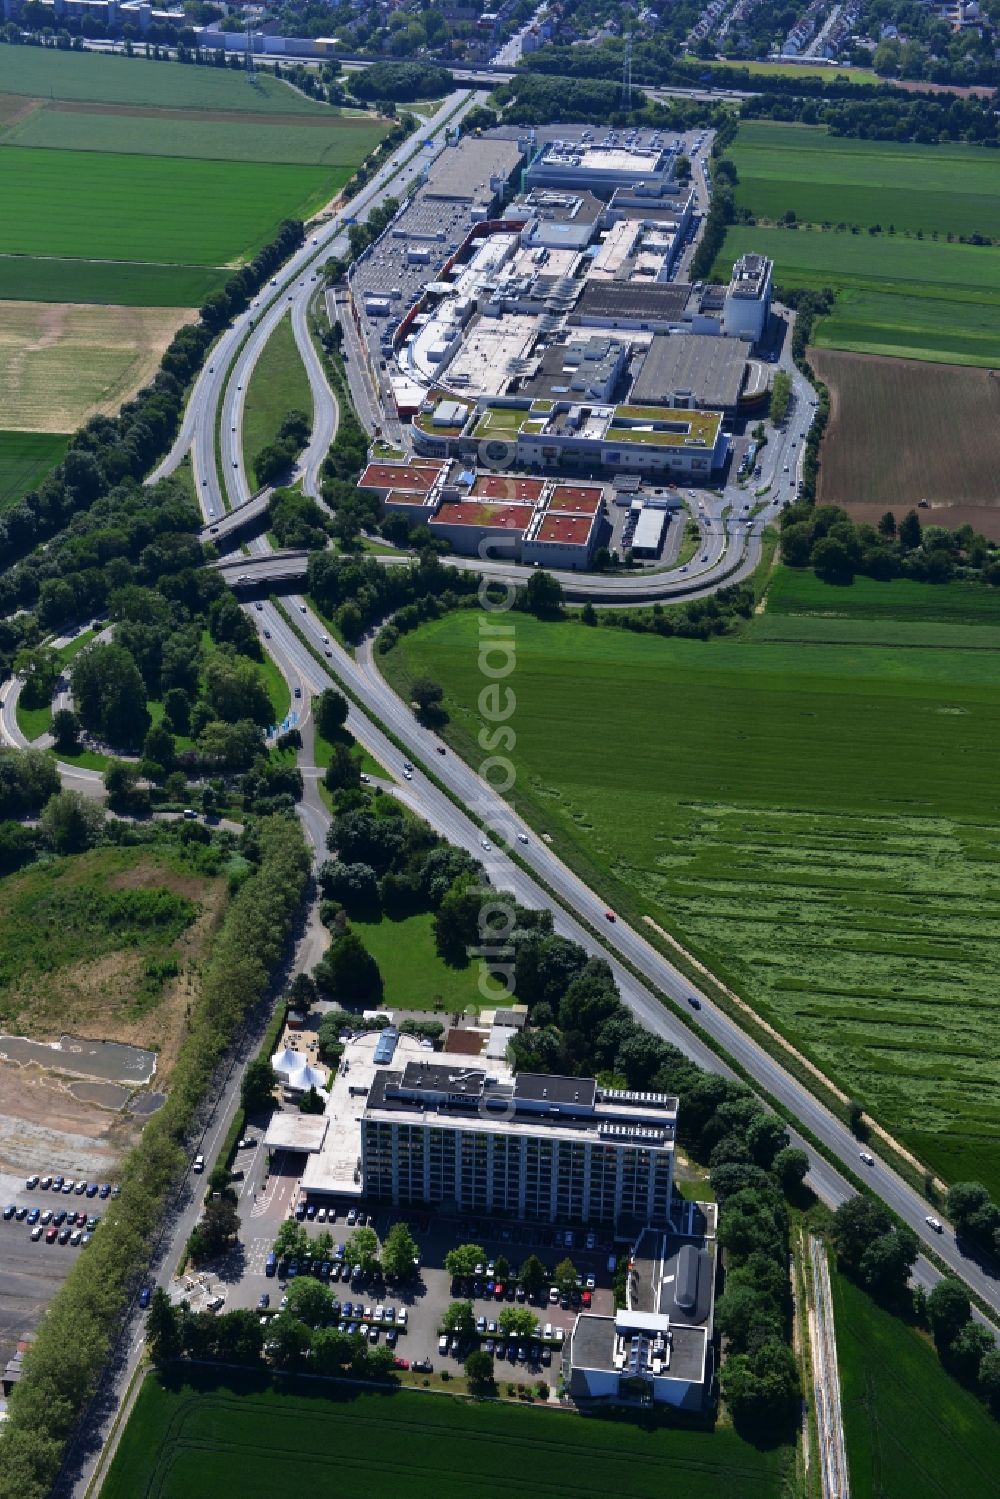 Aerial photograph Sulzbach am Taunus - Building of the conference center, the Dorint Hotel in Sulzbach am Taunus in Hesse